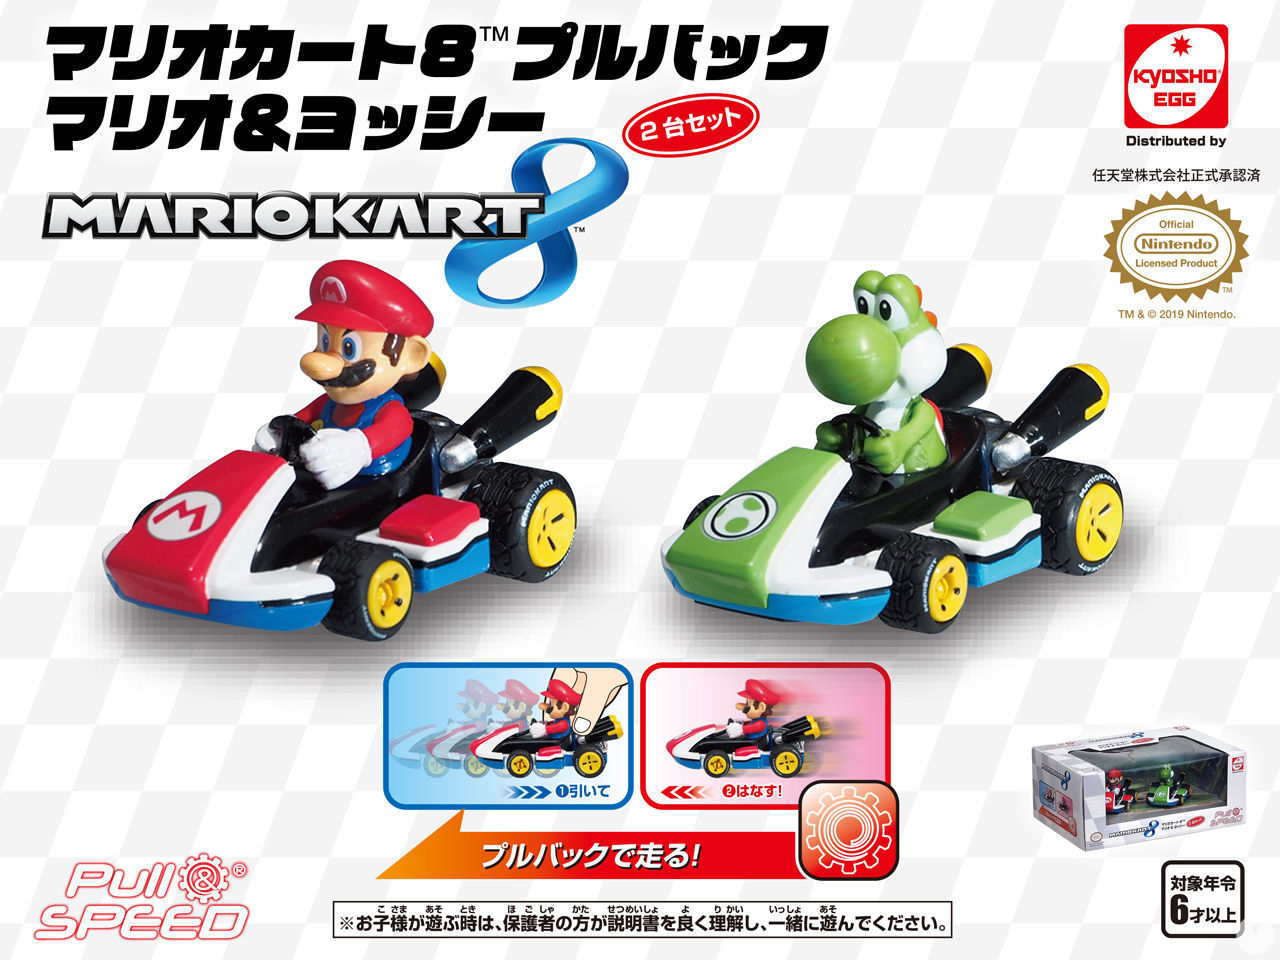 auto art has announced a range of toys-radio control Mario and friends